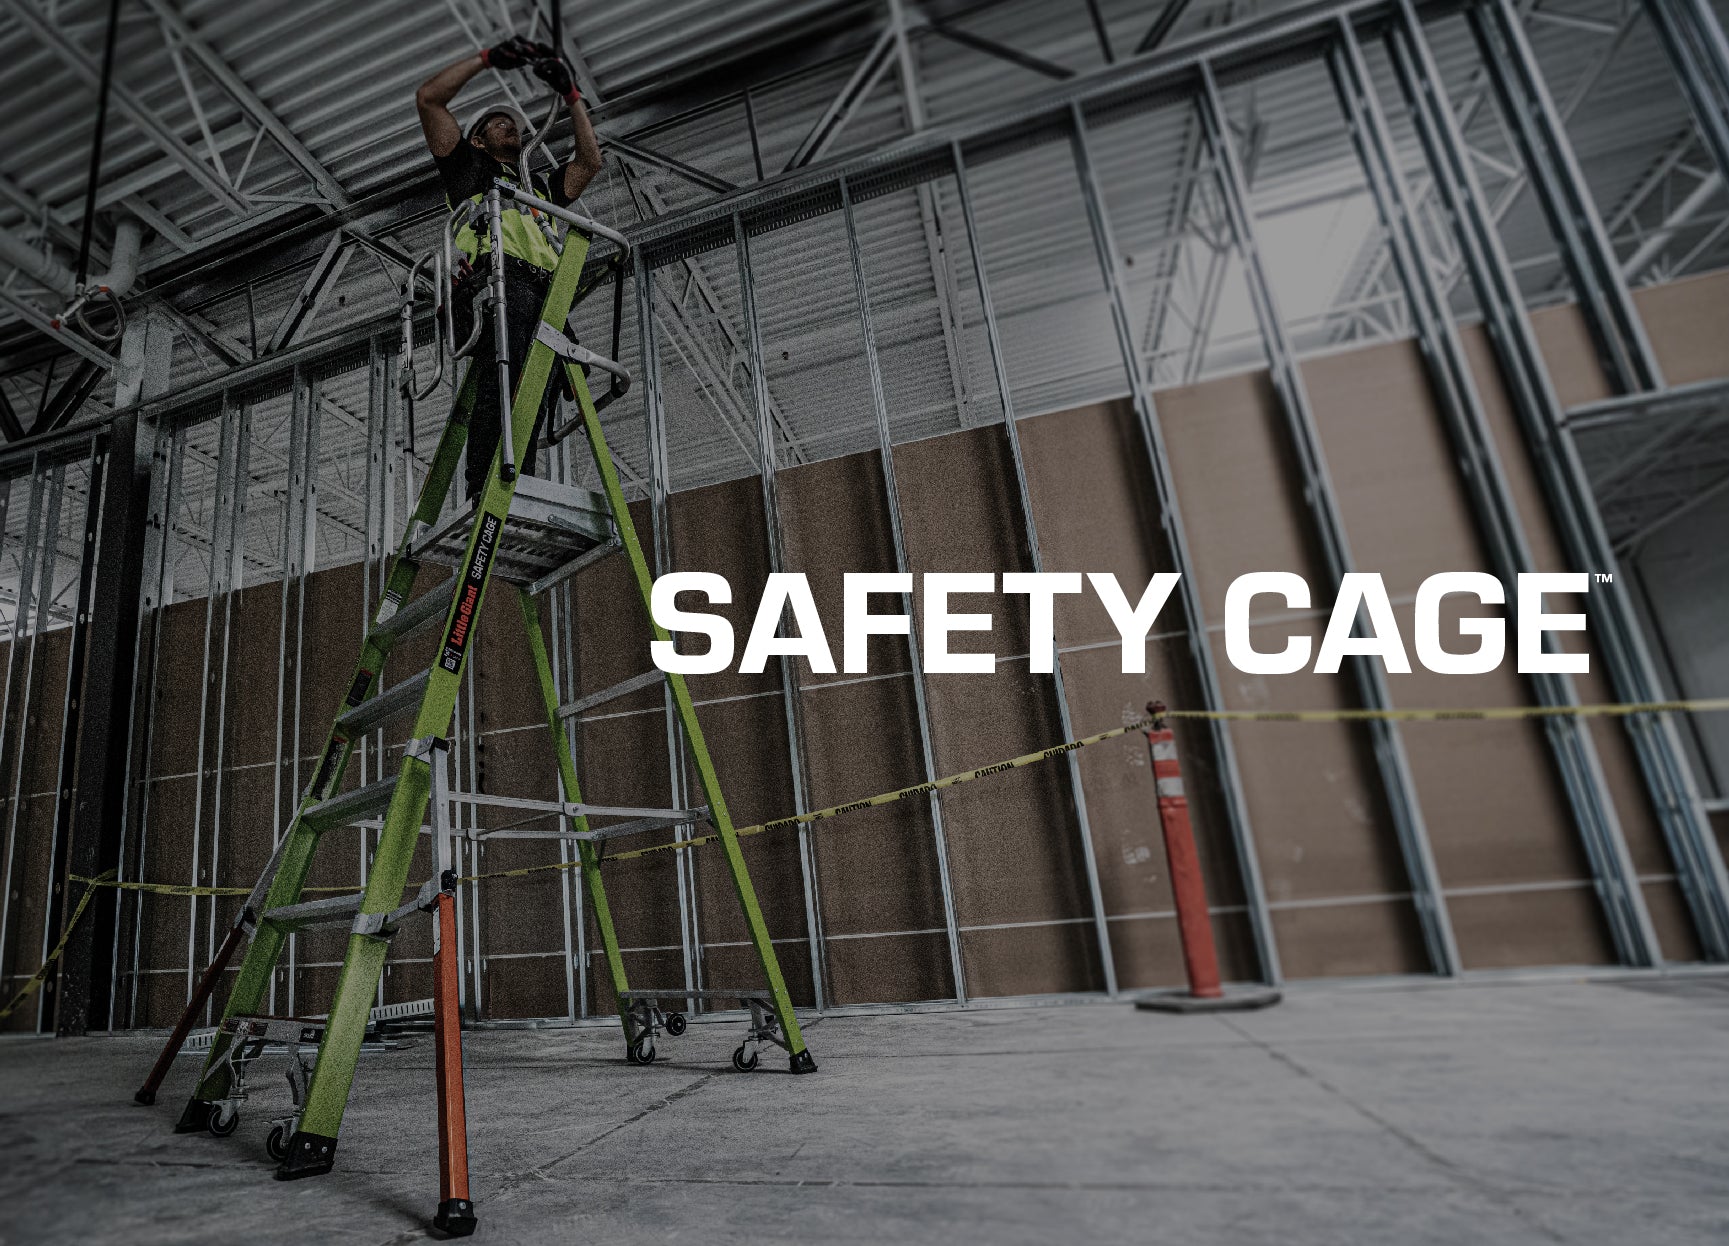 The Little Giant Ladders Safety Cage Safety cage in a warehouse